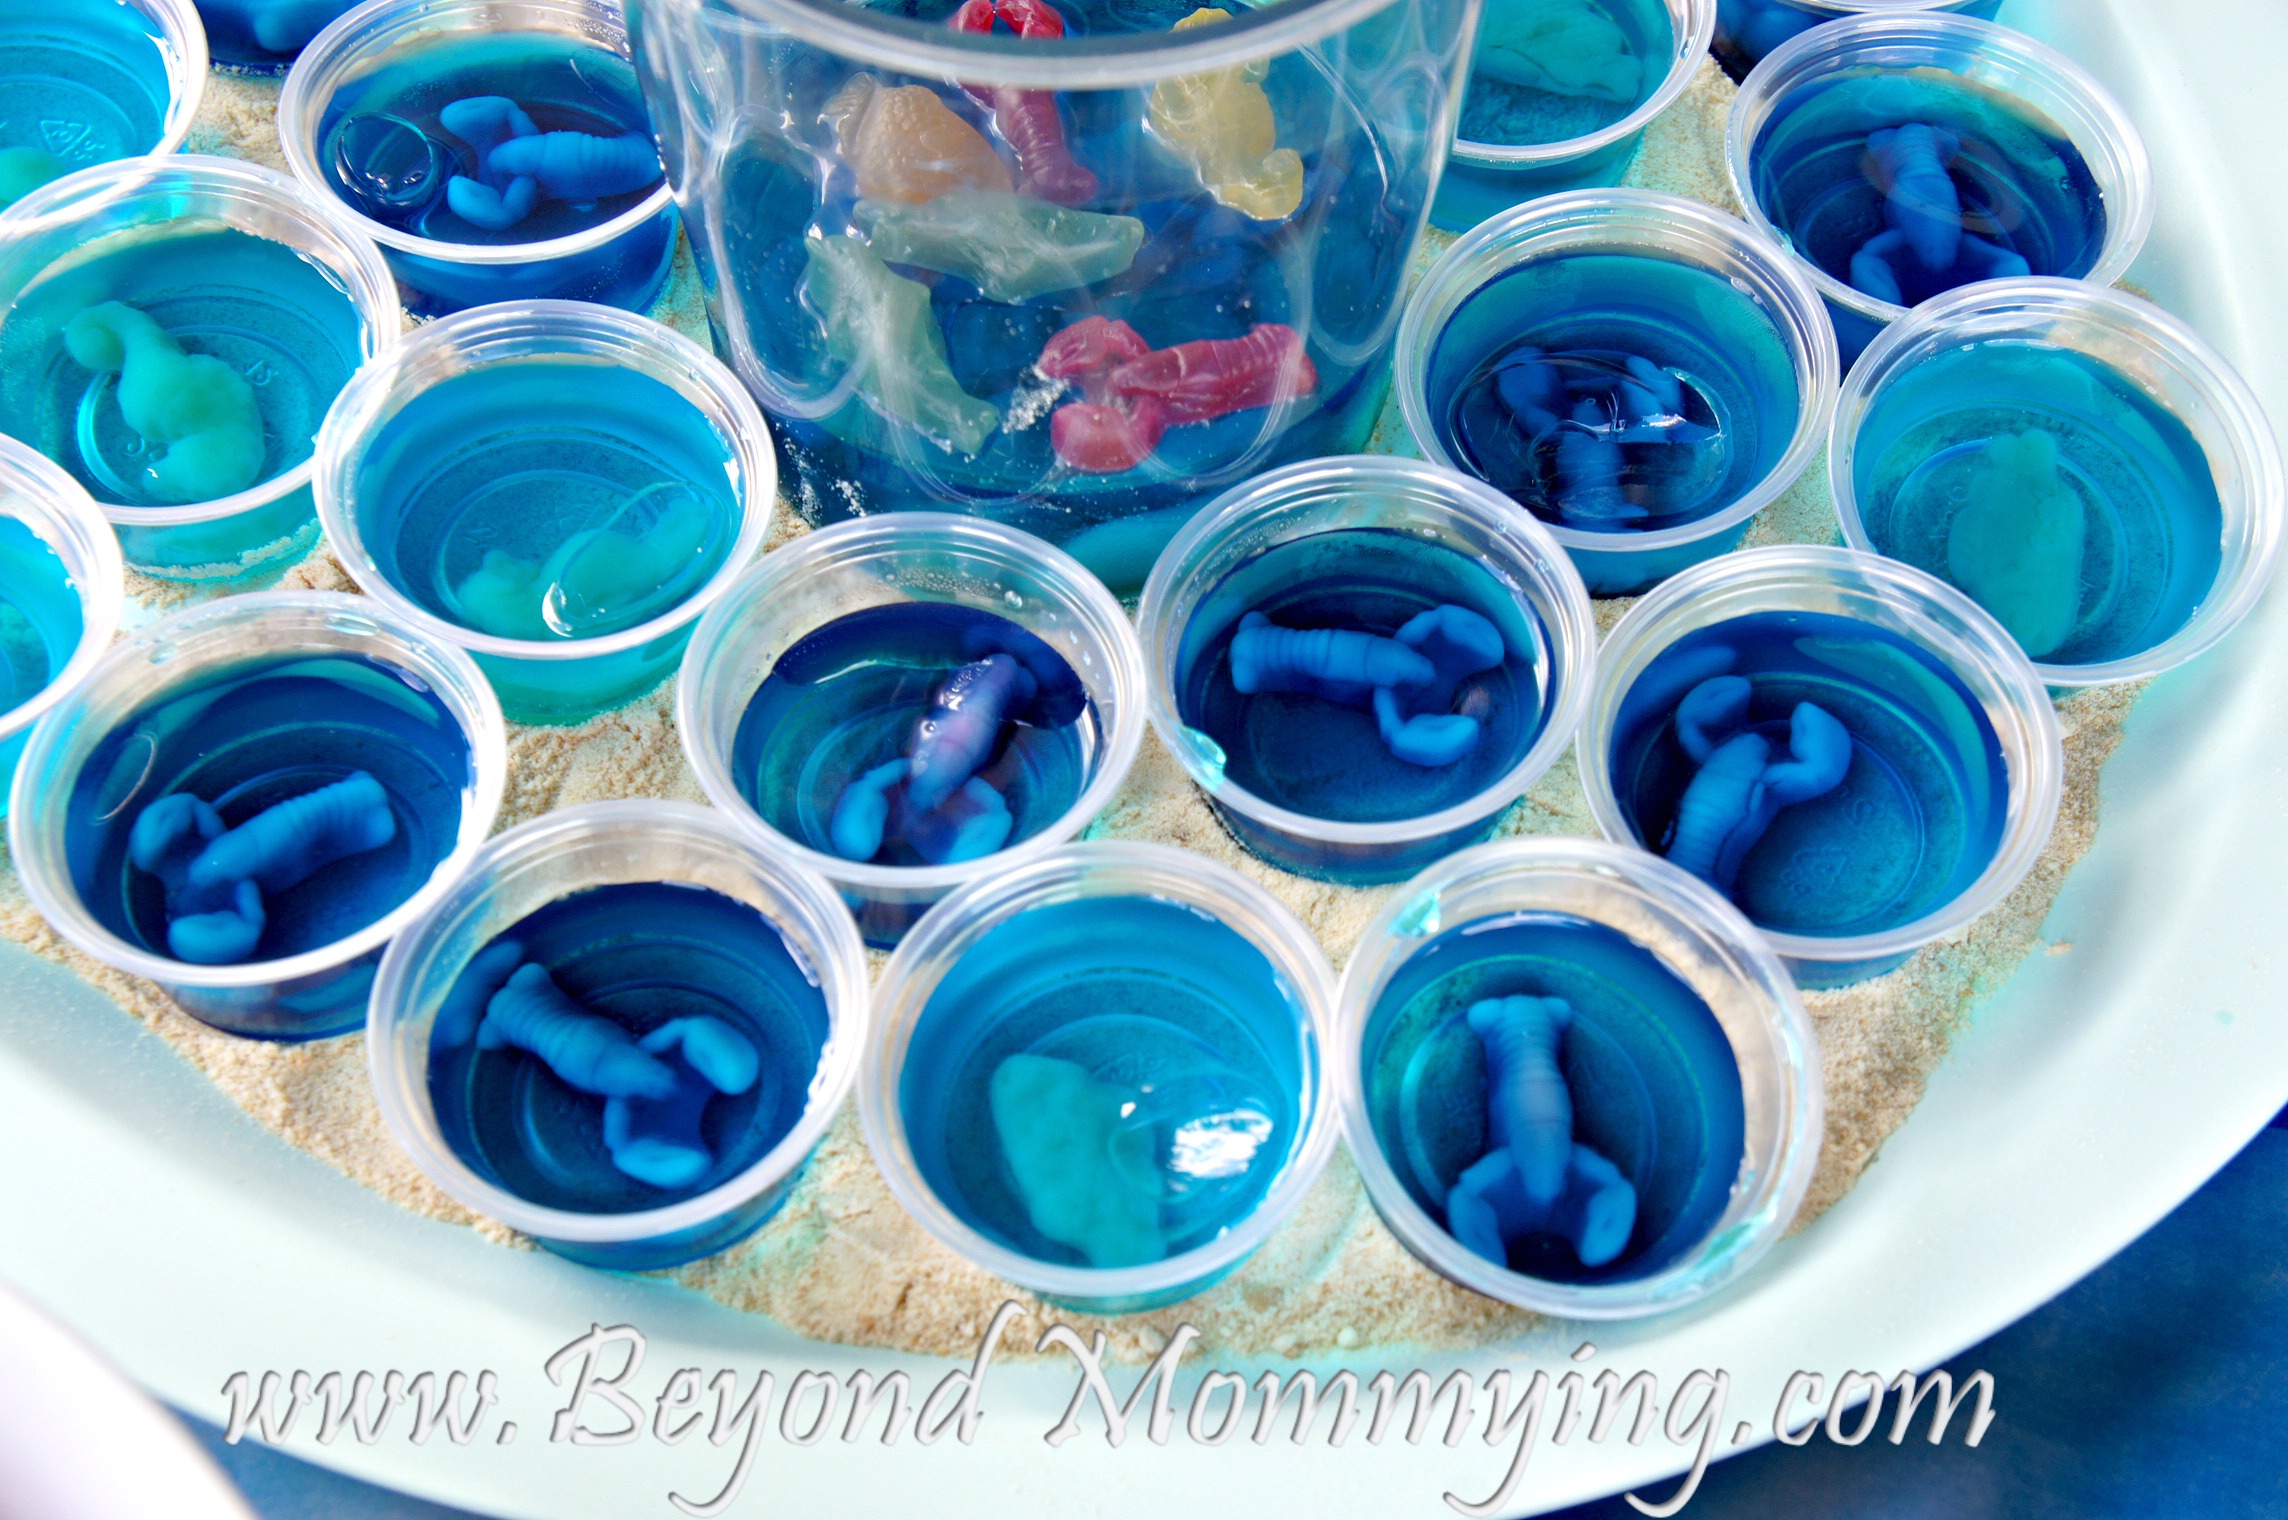 Menu for an Under the Sea Party: Jell-o Fish Bowls